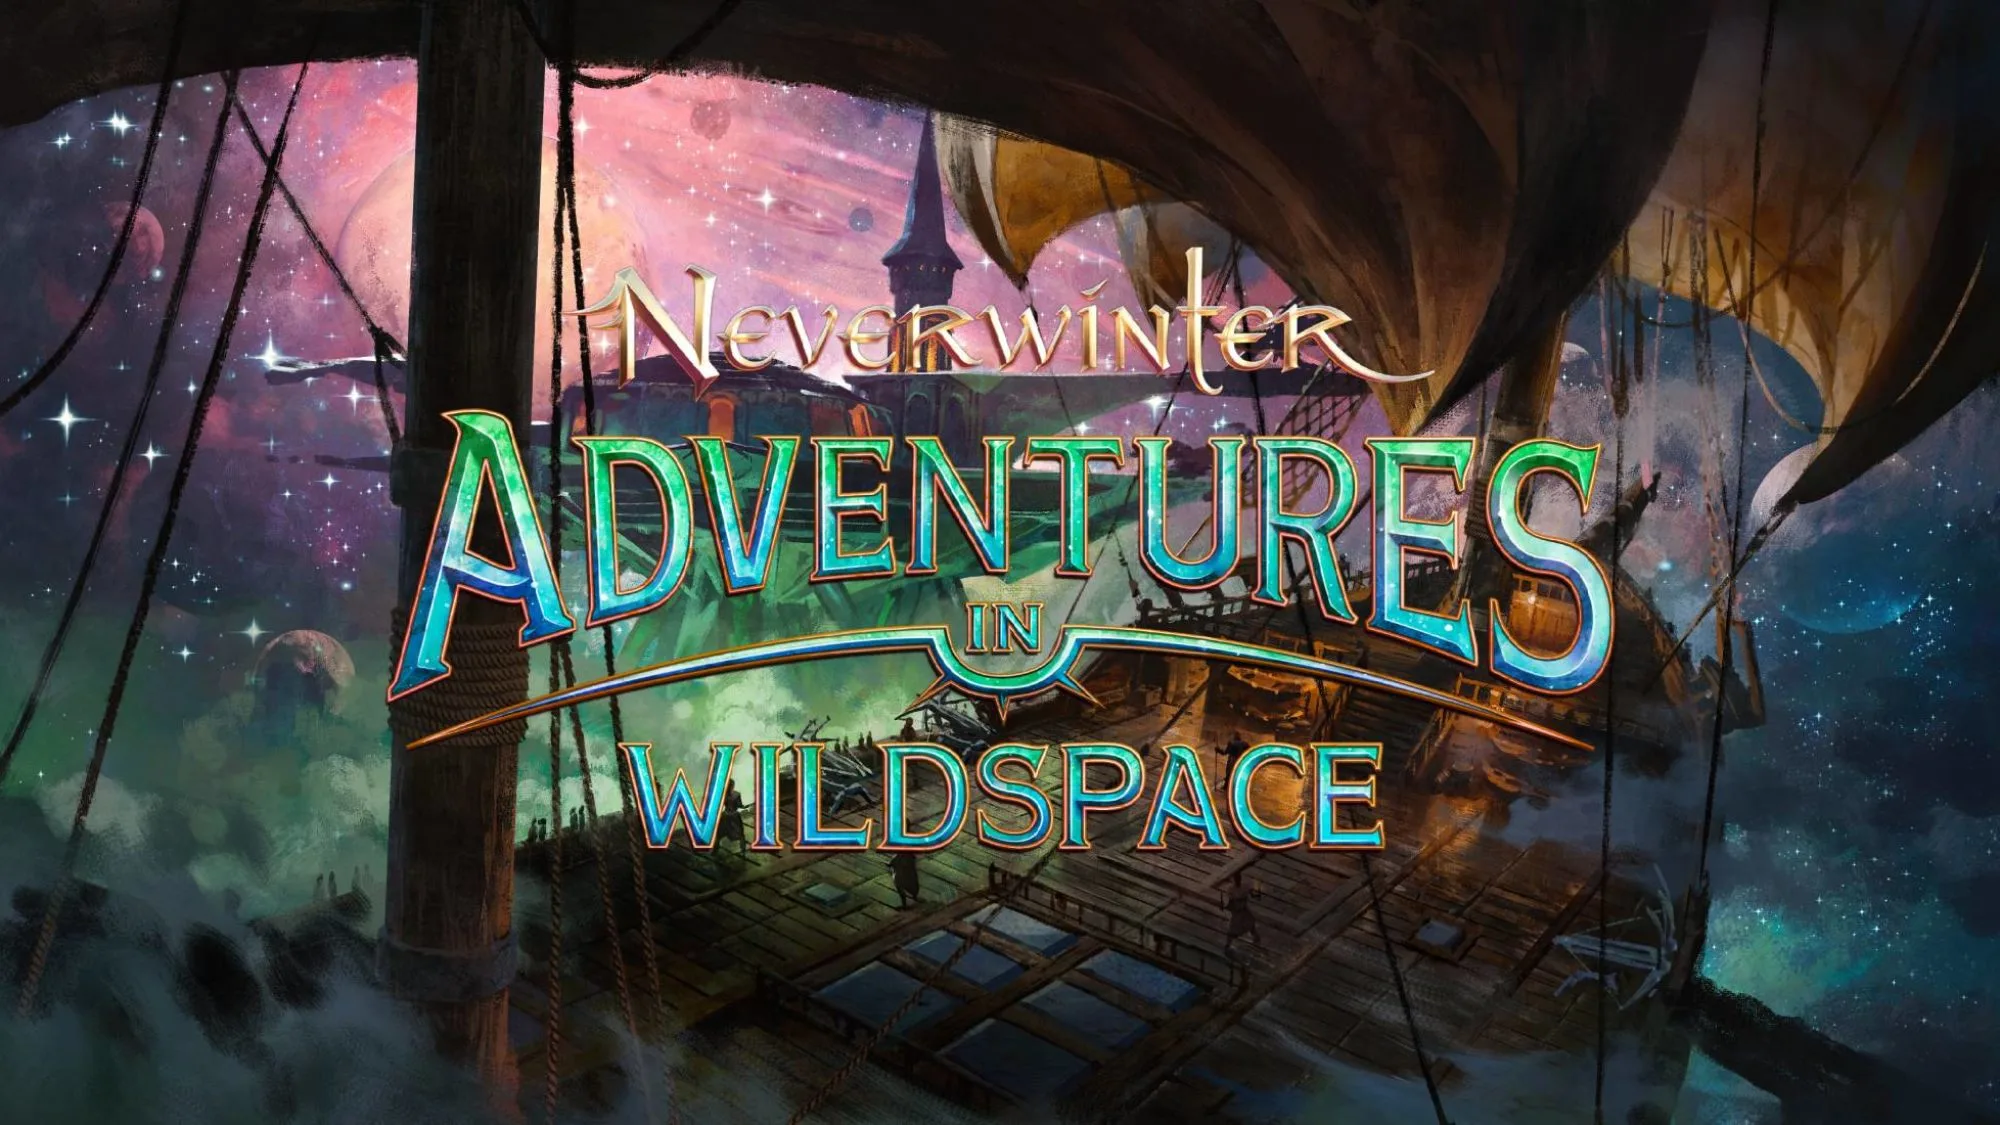 Neverwinter's Latest Expansion "Adventures in Wildspace" Introduces "The Imperial Citadel" and New Heroic Encounters 8